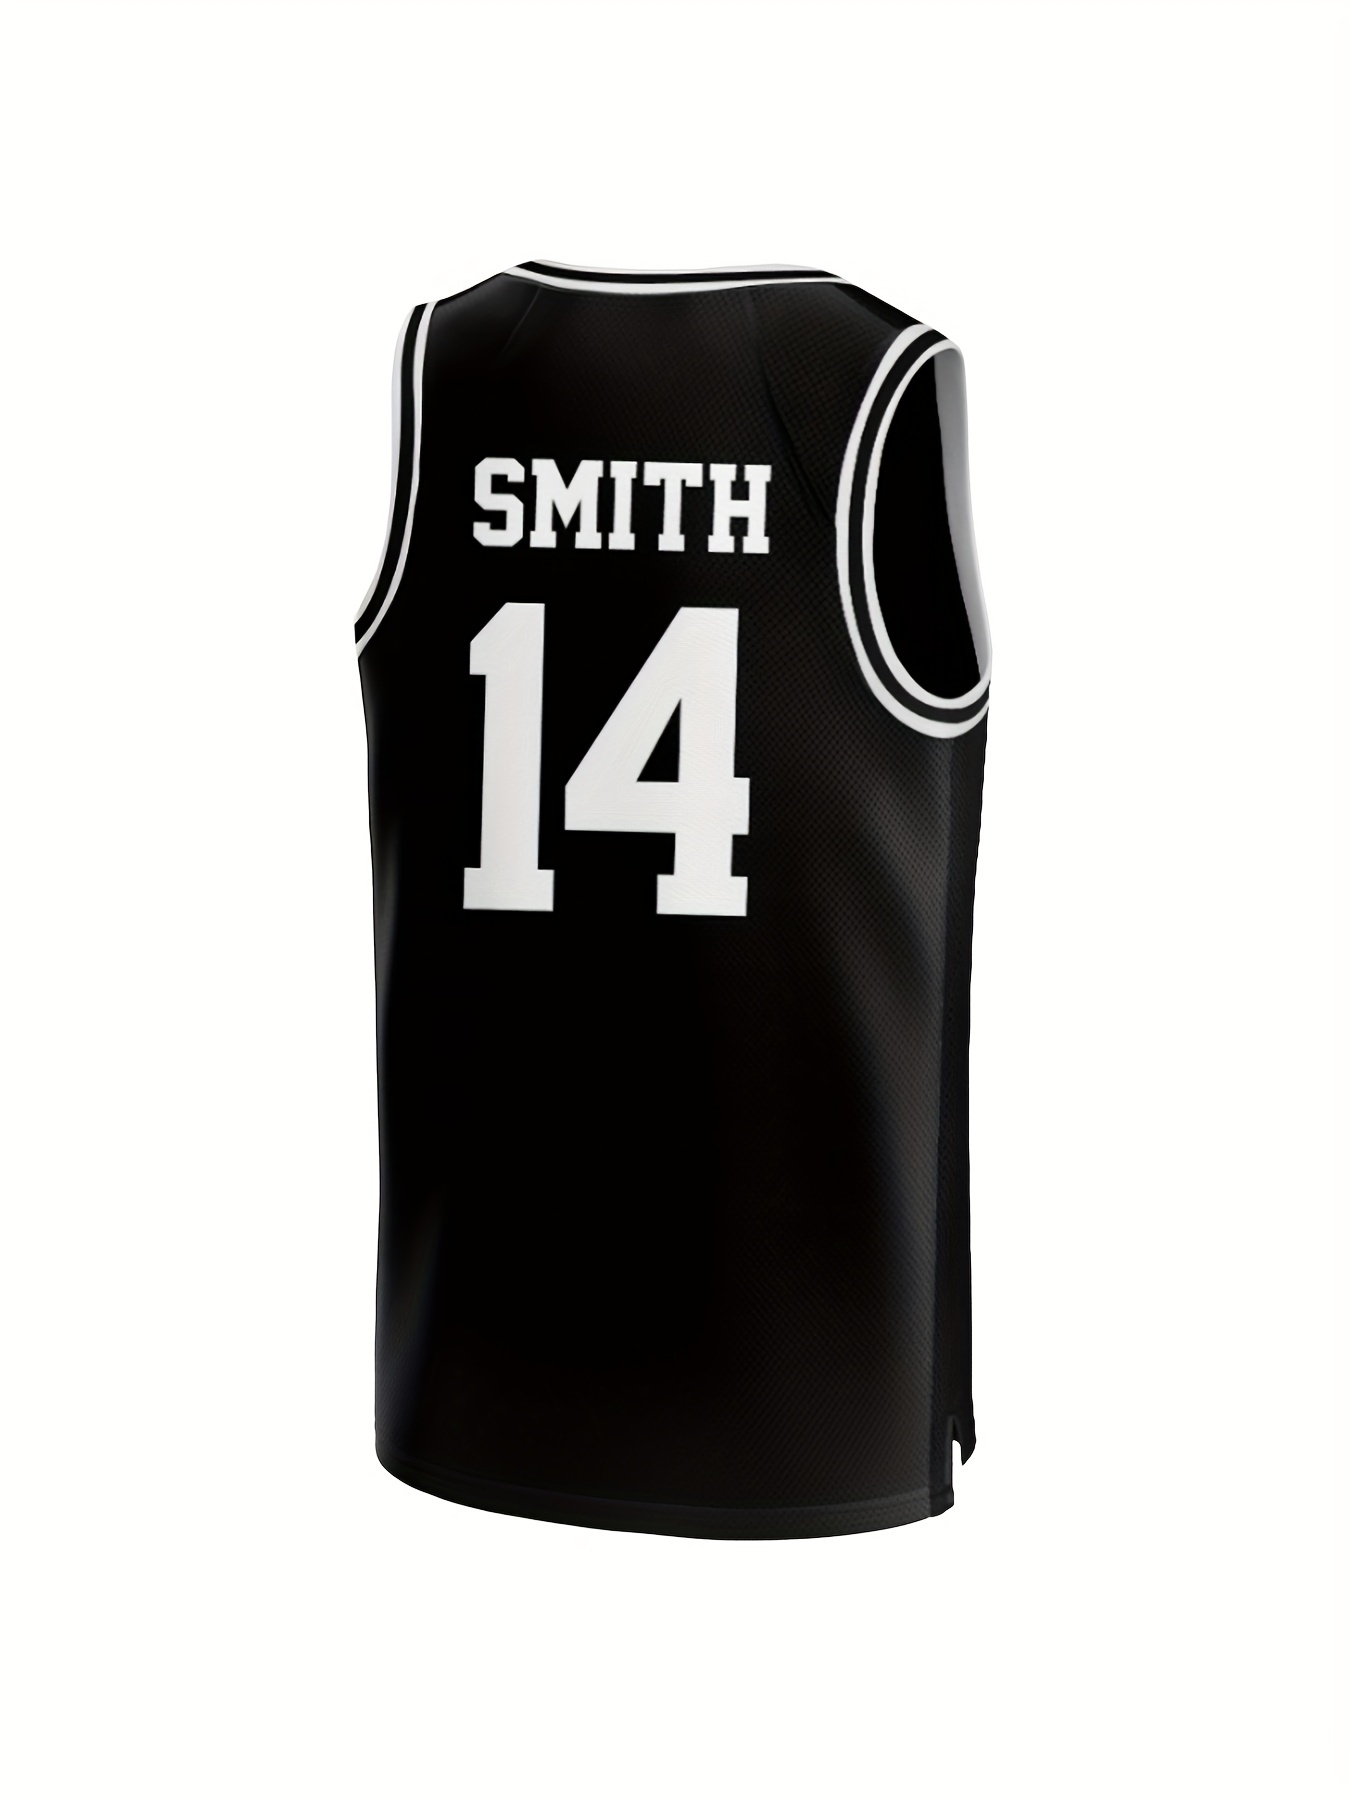 Unlimited Classics Buy Unique Smith #14 Bel-Air Academy Black Basketball Jersey Online 3XL